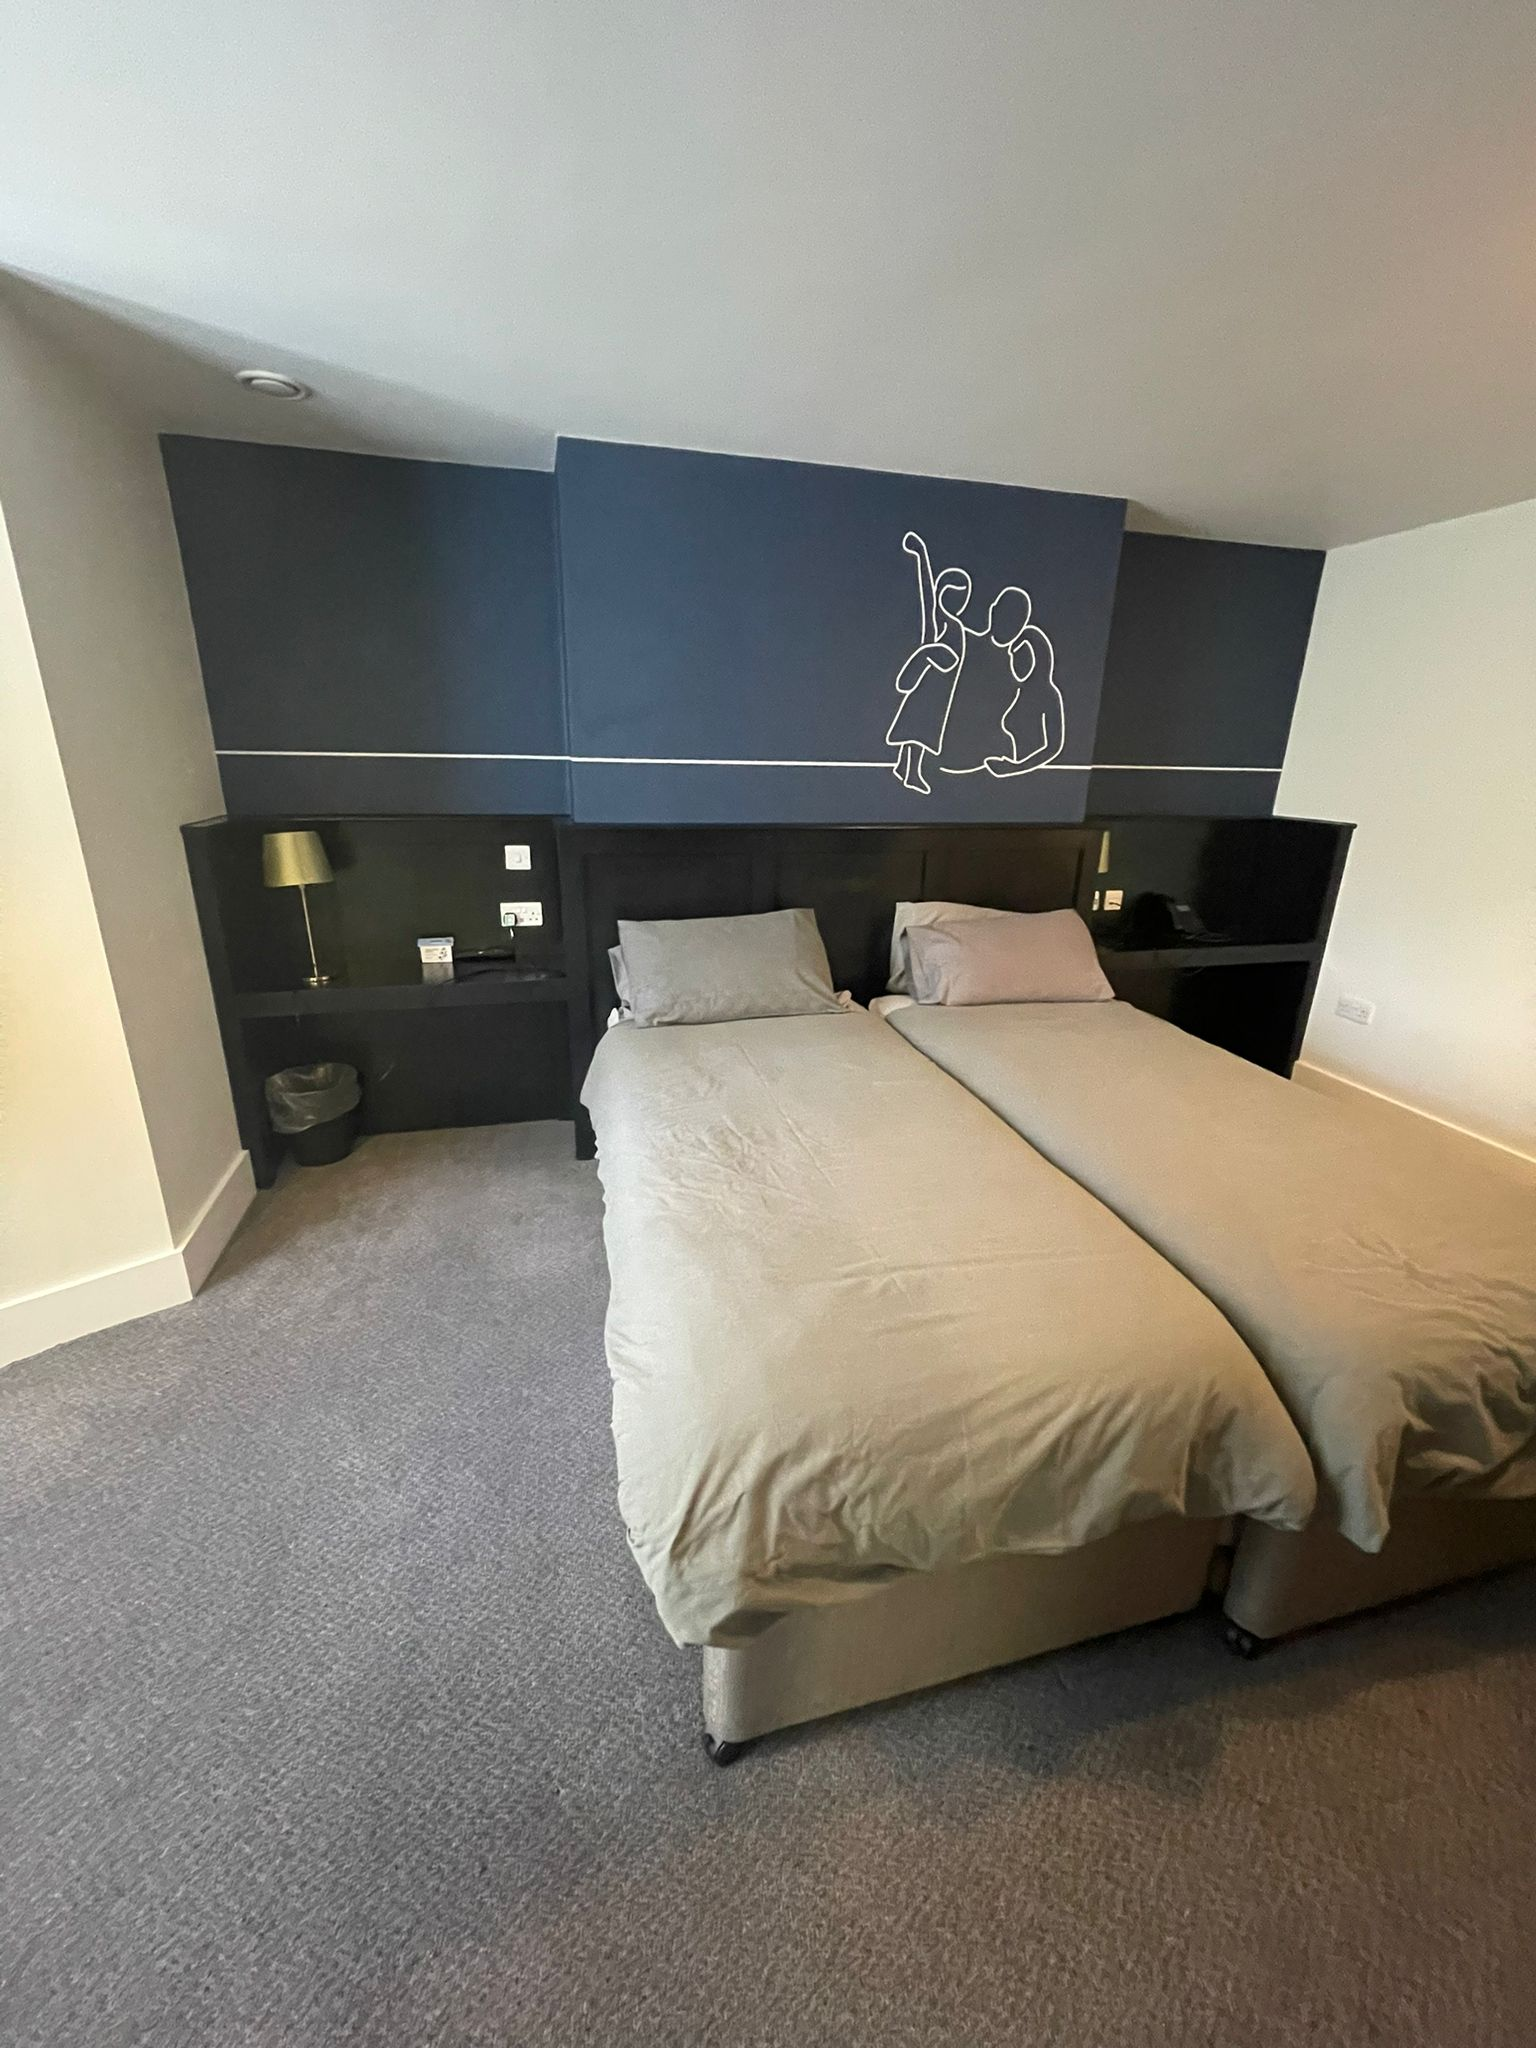 an image of one of the rooms in the house, having been refurbished, new bed, headboard, 